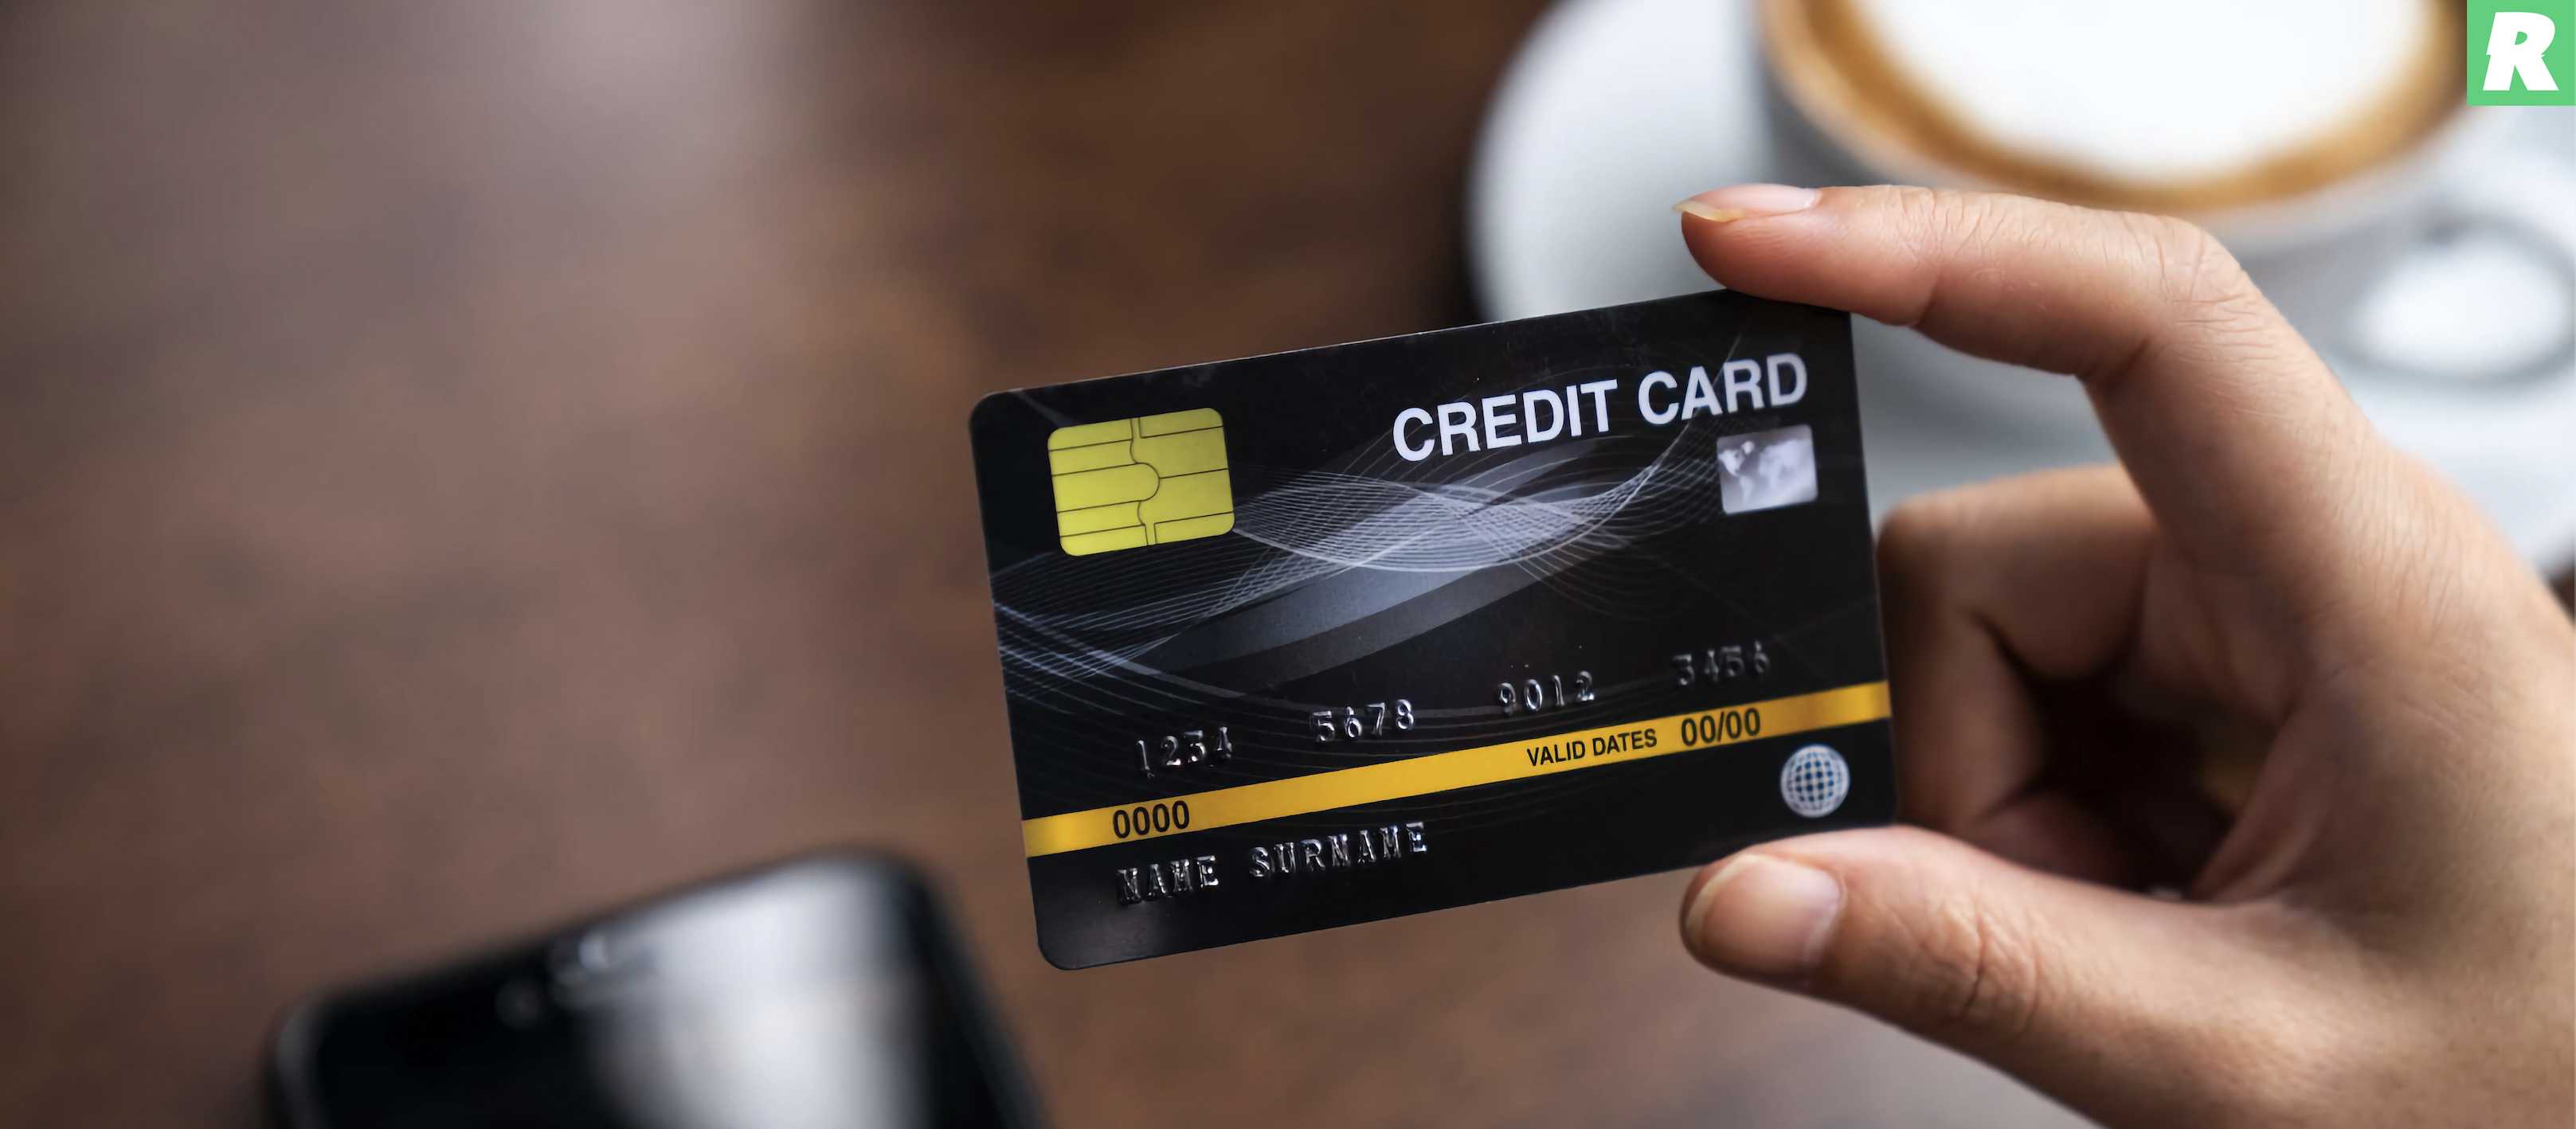 Want to Pay a Friend with a Credit Card?